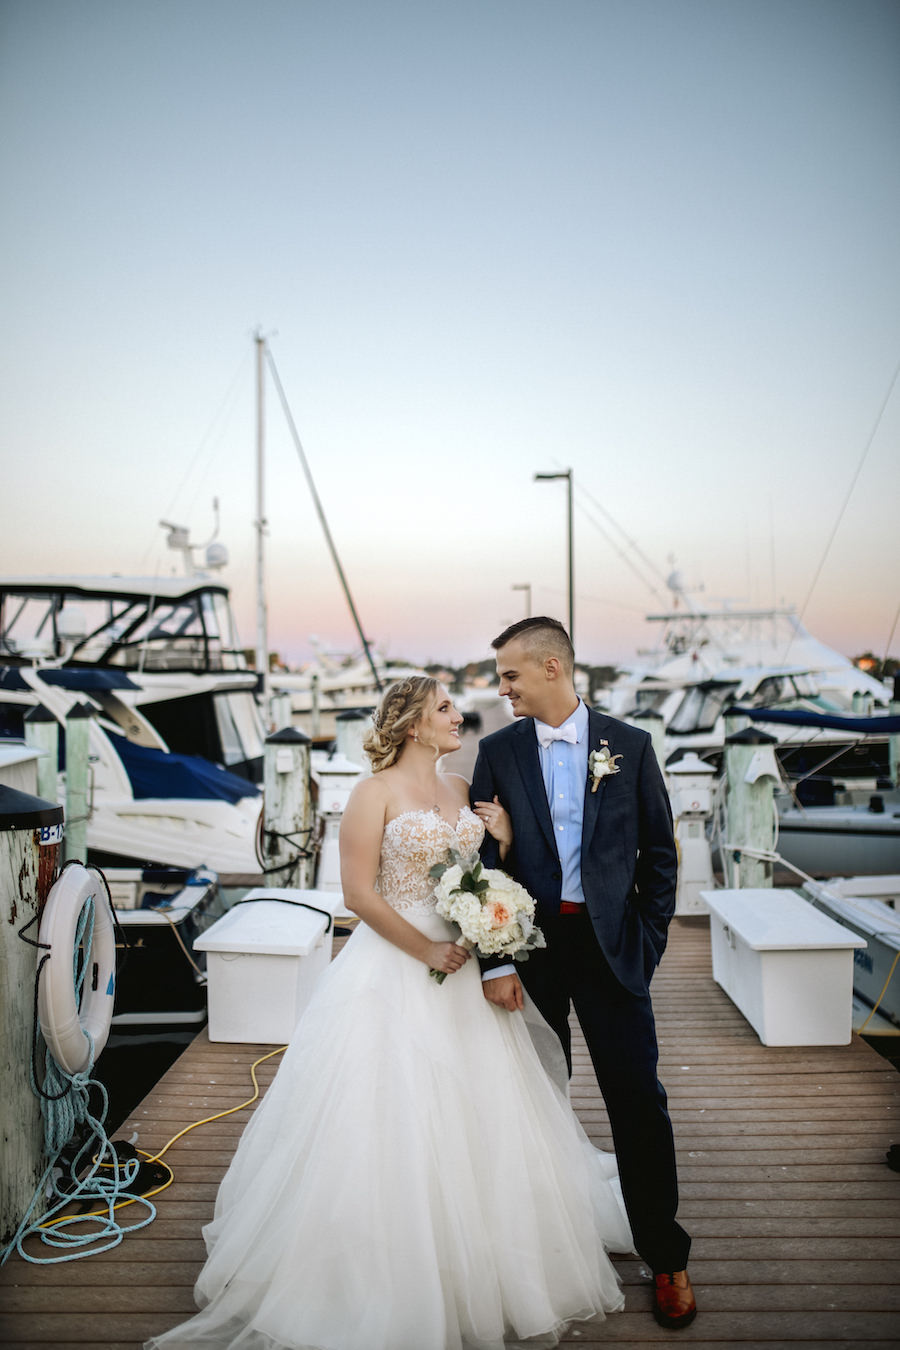 Outdoor Sarasota Bride and Groom Wedding Portrait with Bride in Lace and Tulle Reem Acra Ballgown | Bridal Boutique Blush Bridal Sarasota | Wedding Venue Sarasota Yacht Club | Tampa Bay Wedding Planner NK Productions